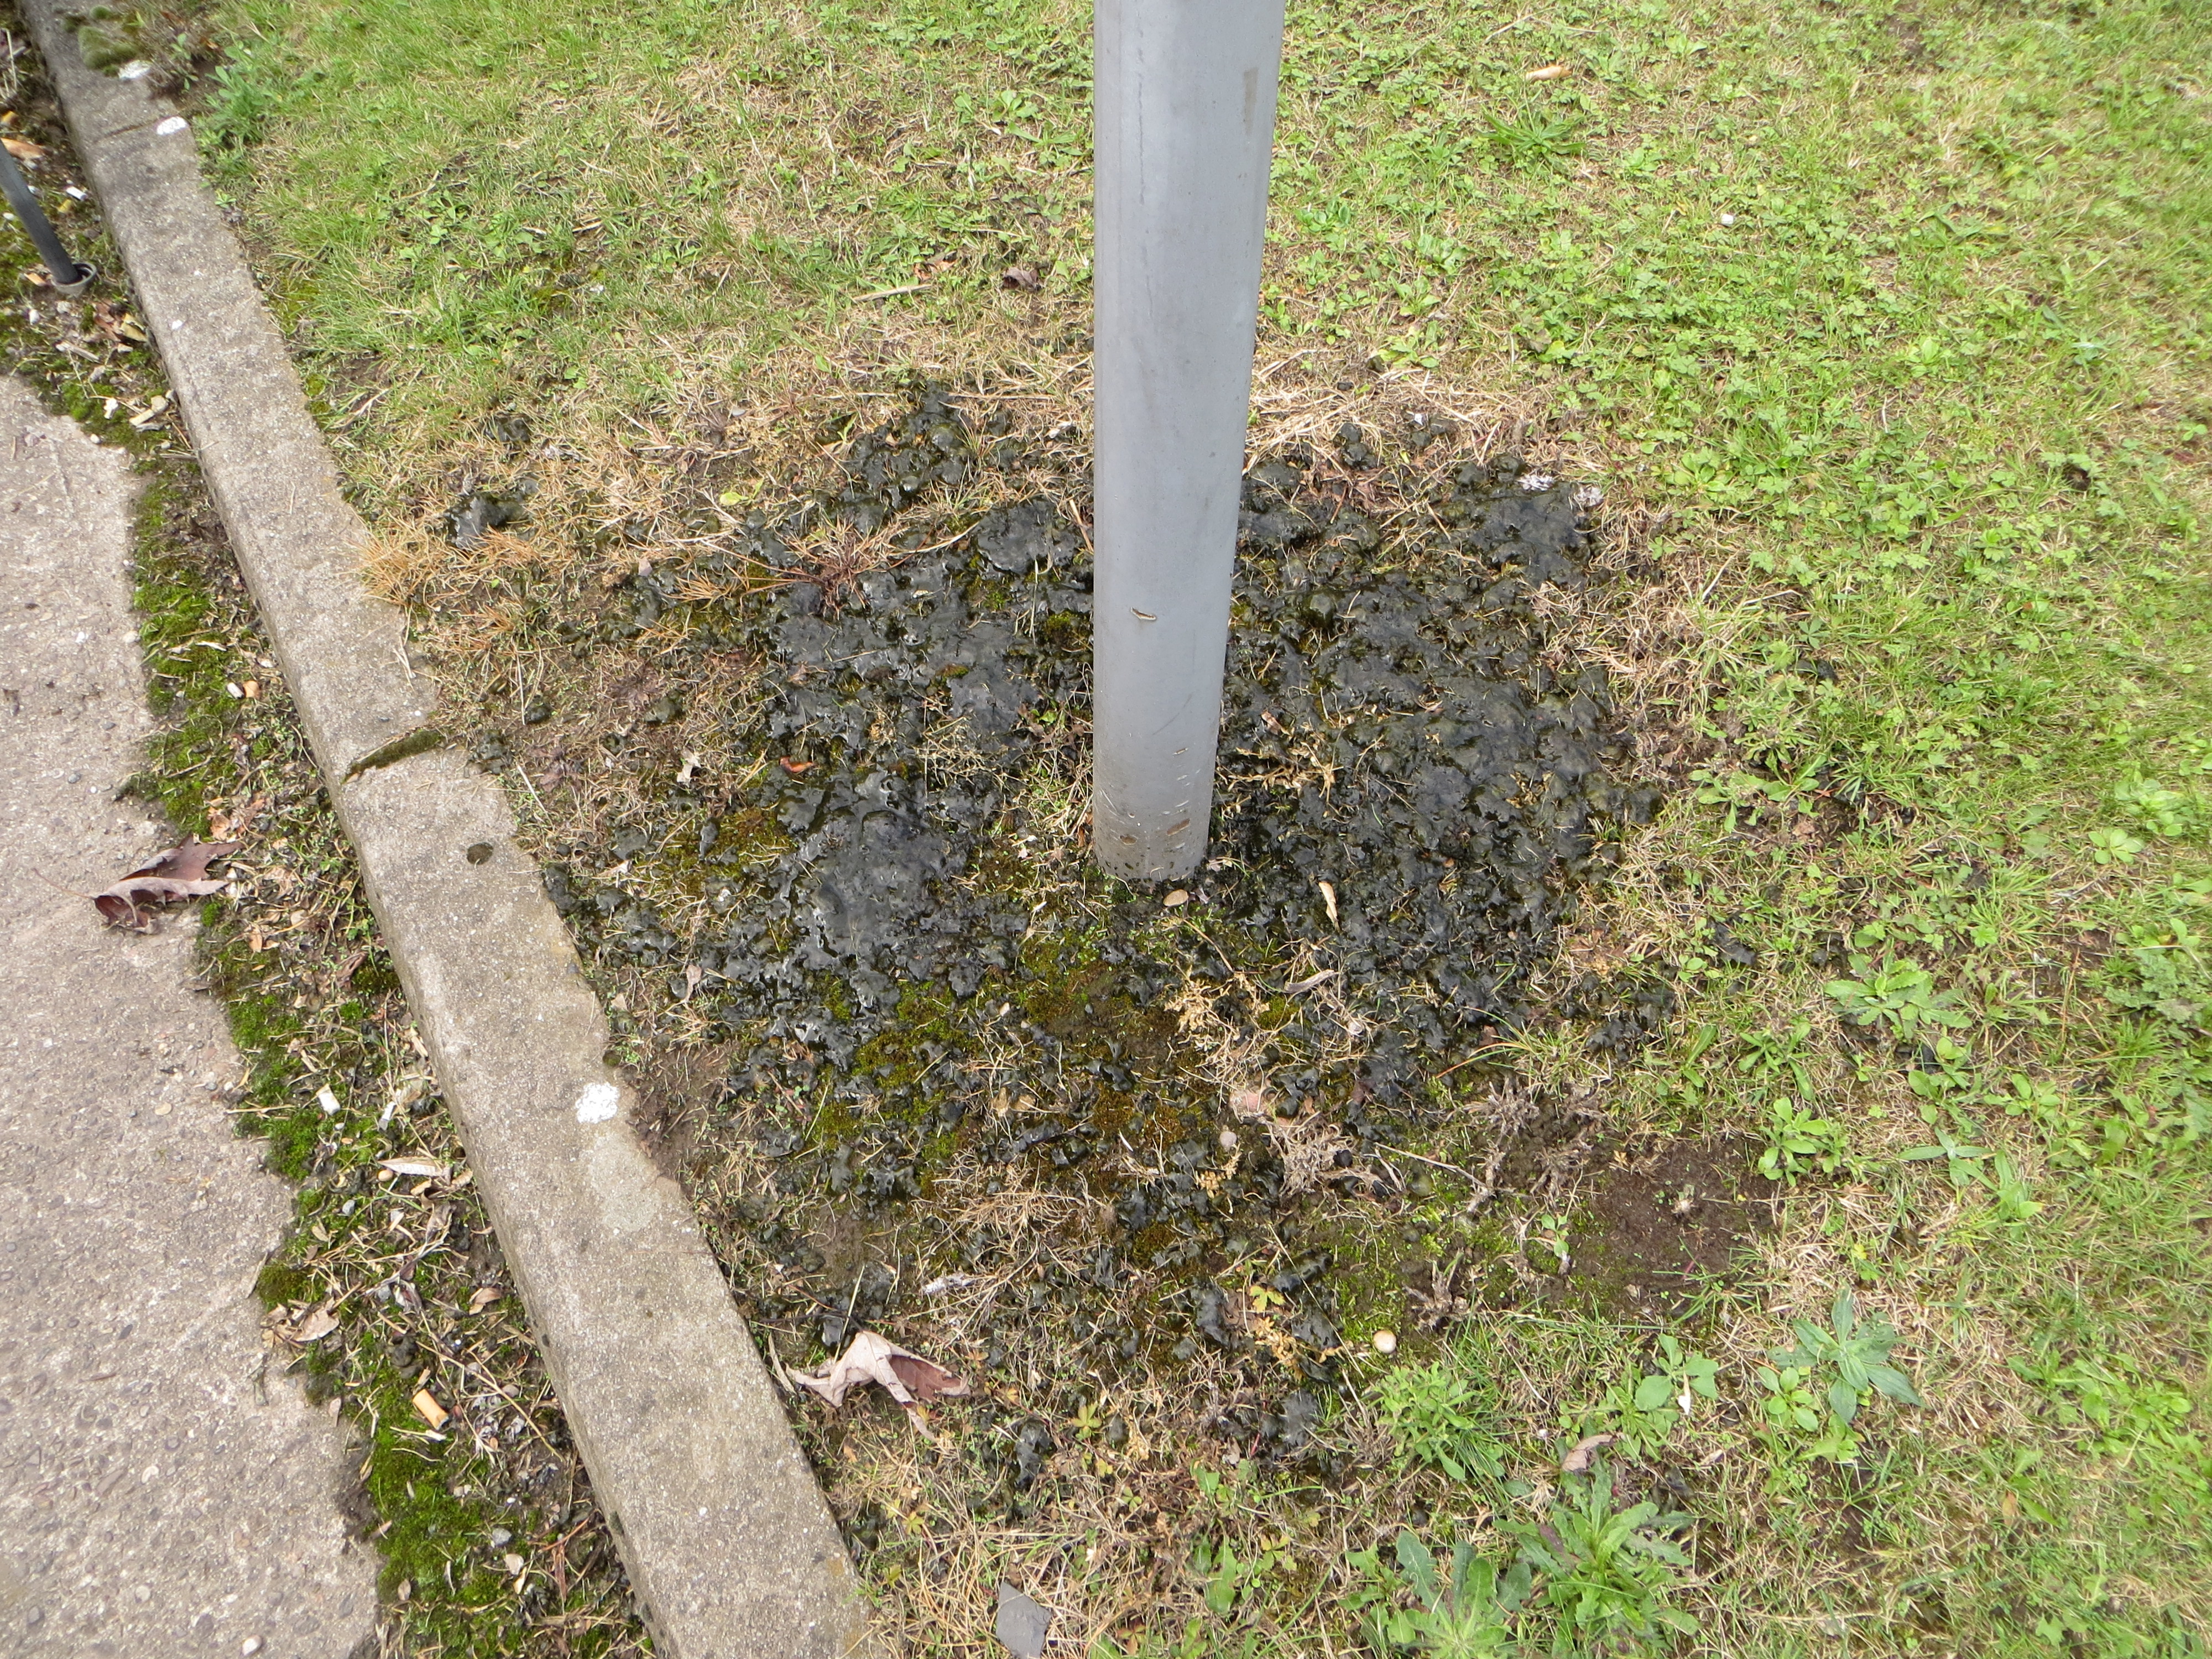 Compacted soil around a pole with Nostoc.